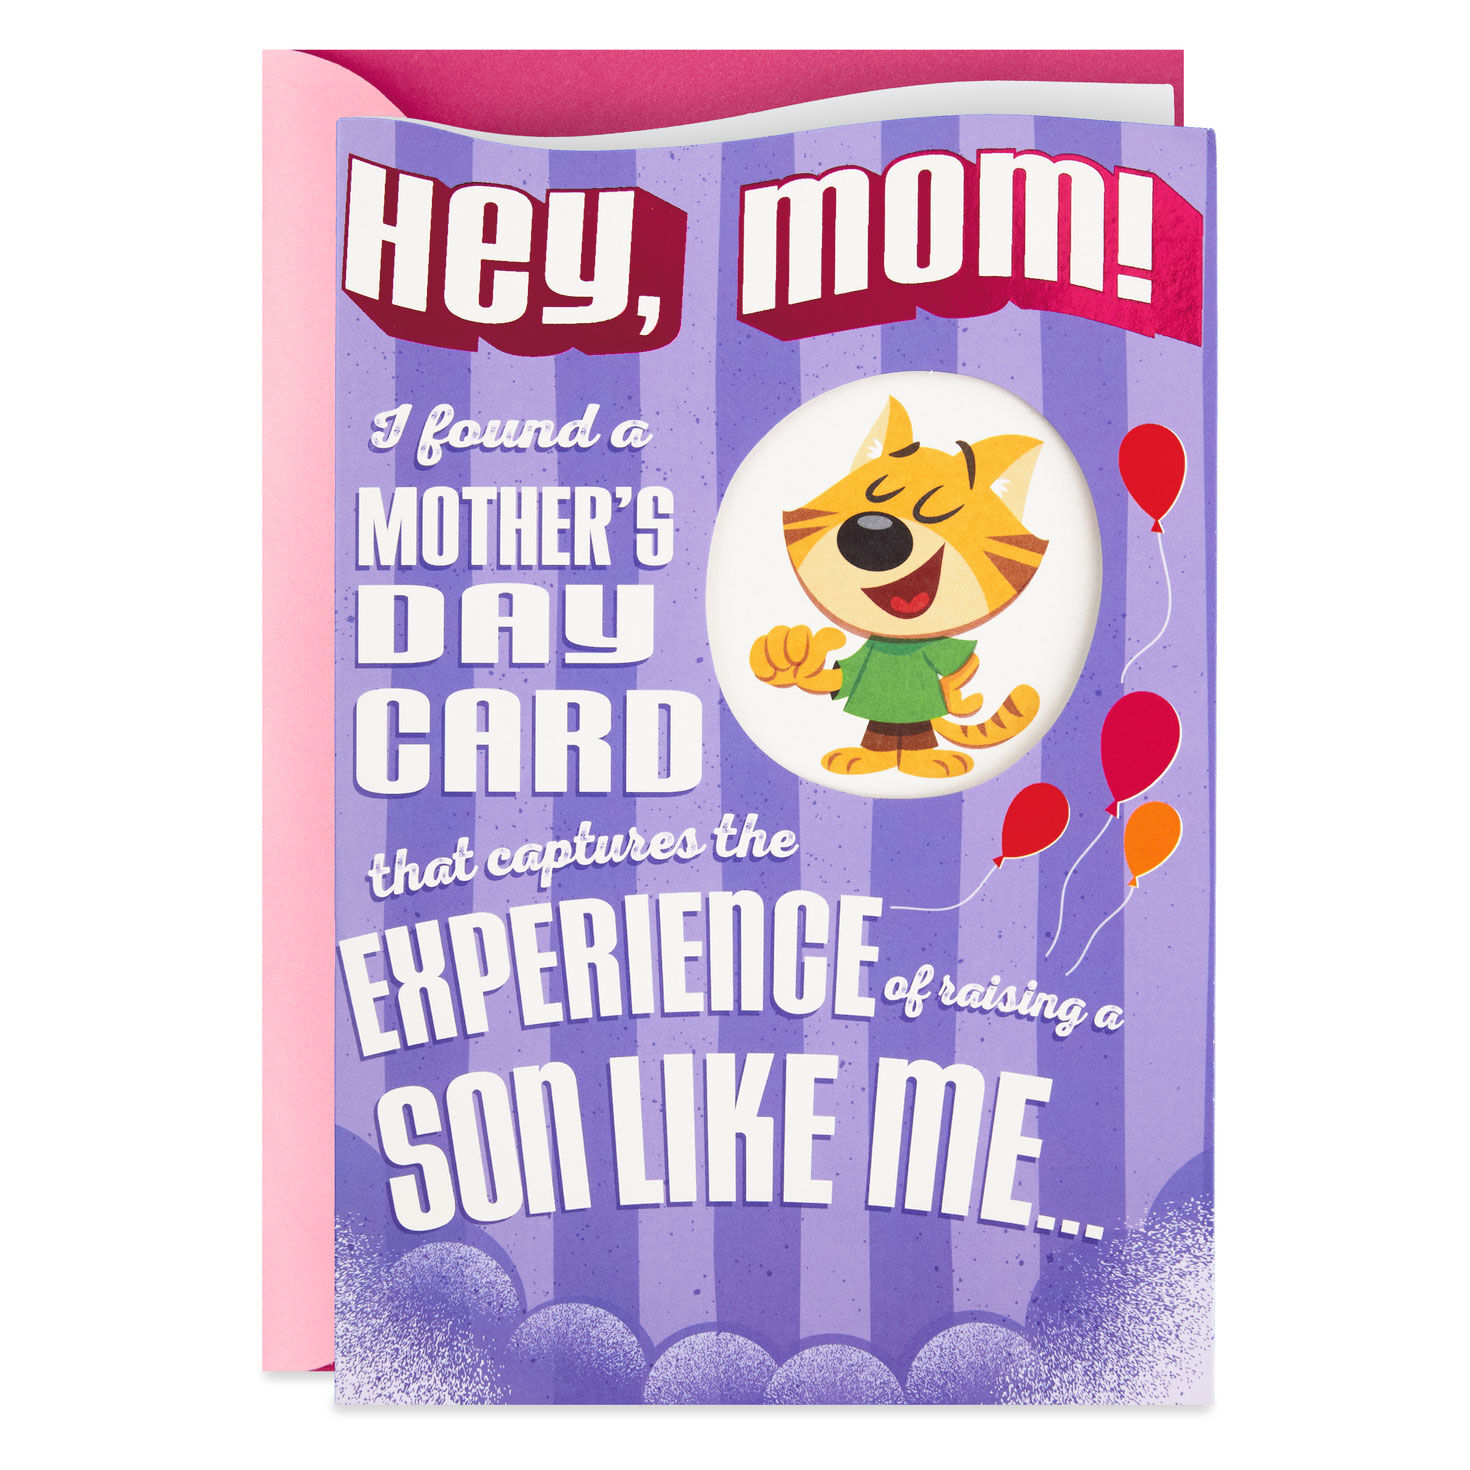 Rollercoaster Ride Funny Pop-Up Mother's Day Card for Mom From Son for only USD 6.29 | Hallmark